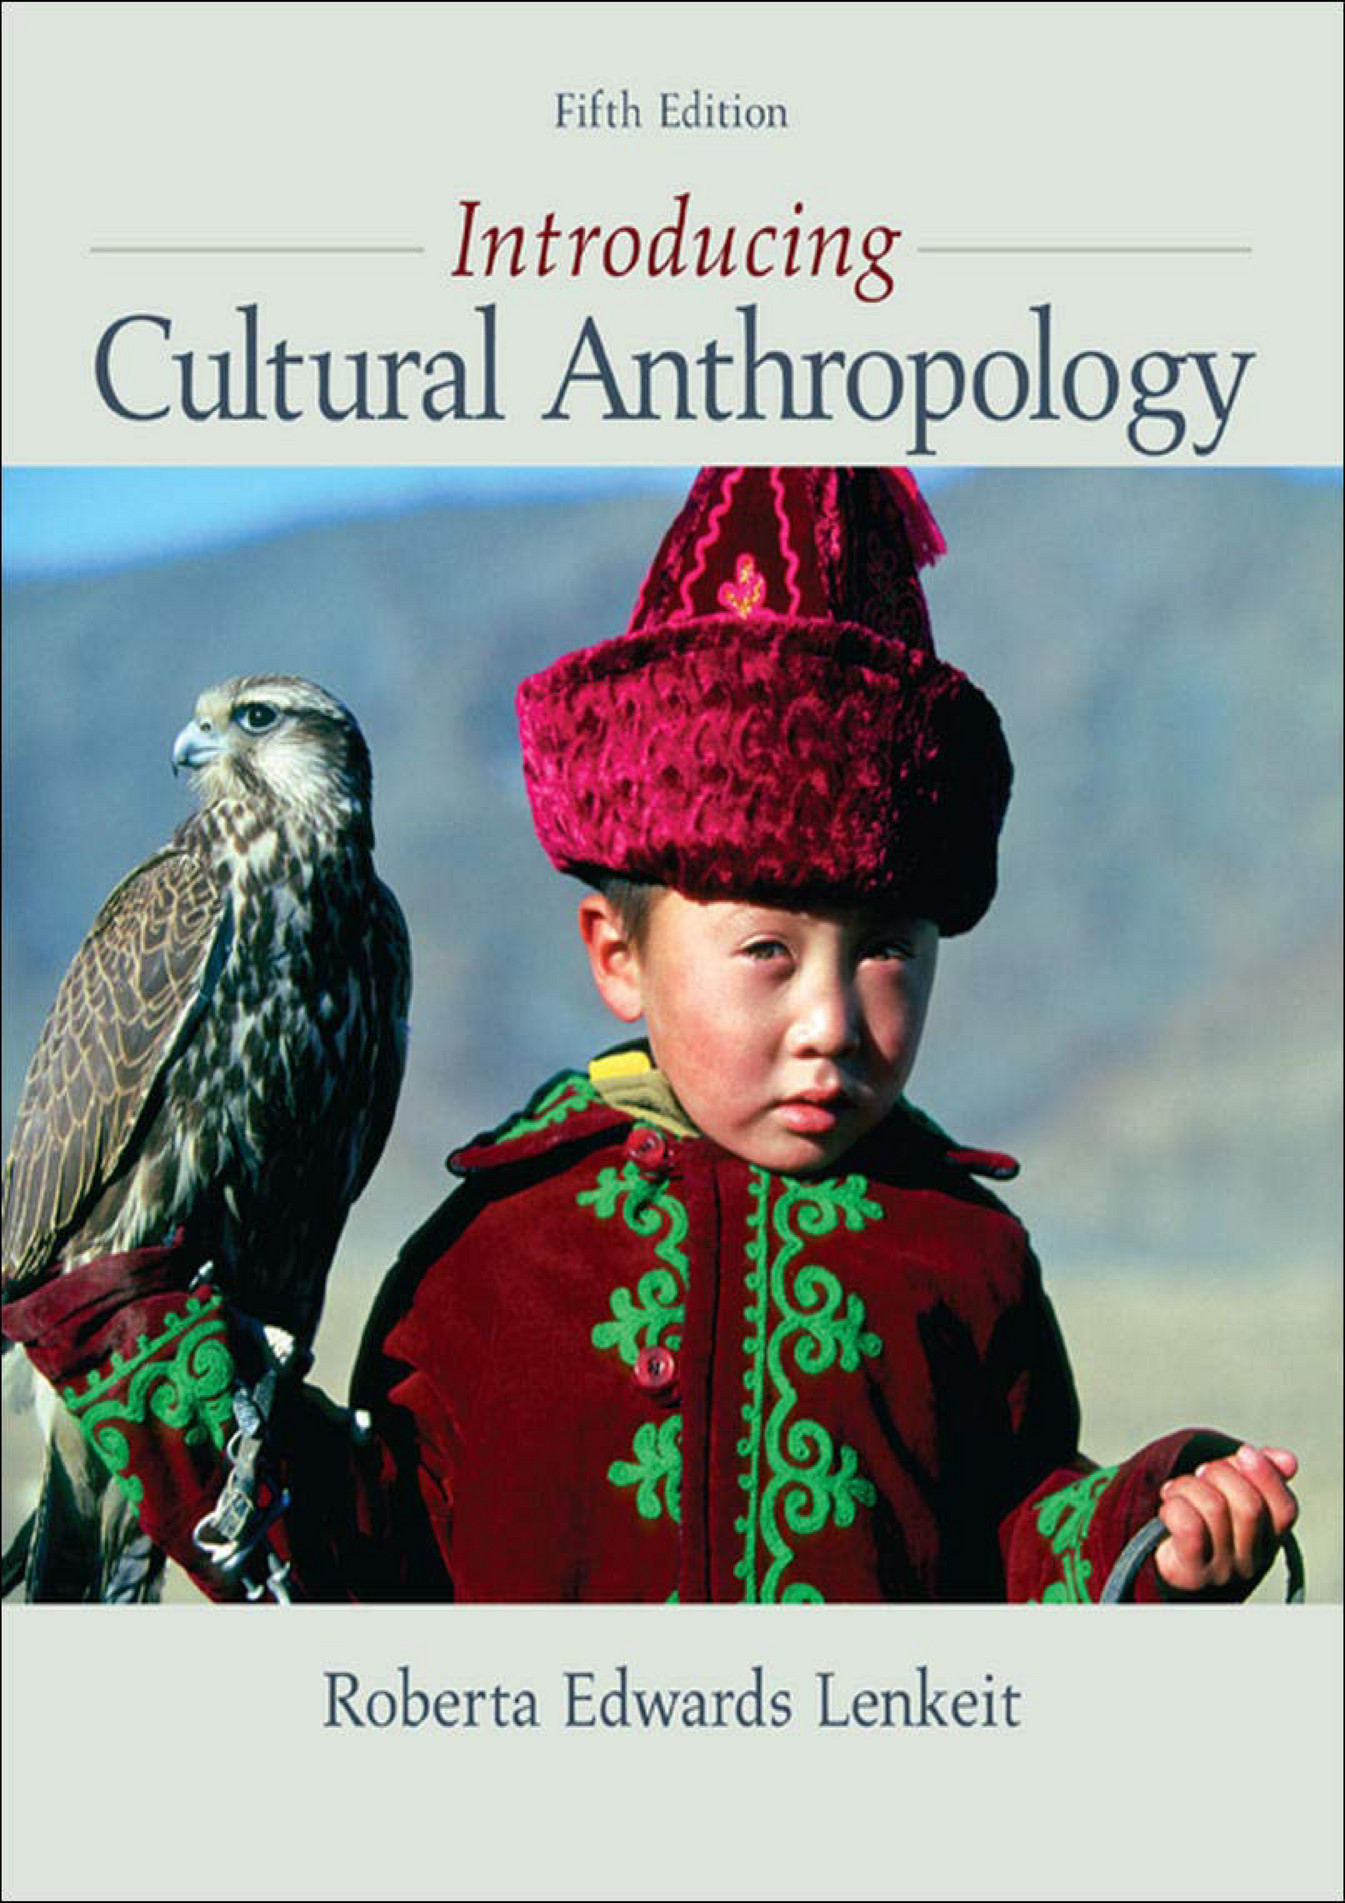 e-Book - EBOOK Introducing Cultural Anthropology - Page 1 - Created ...